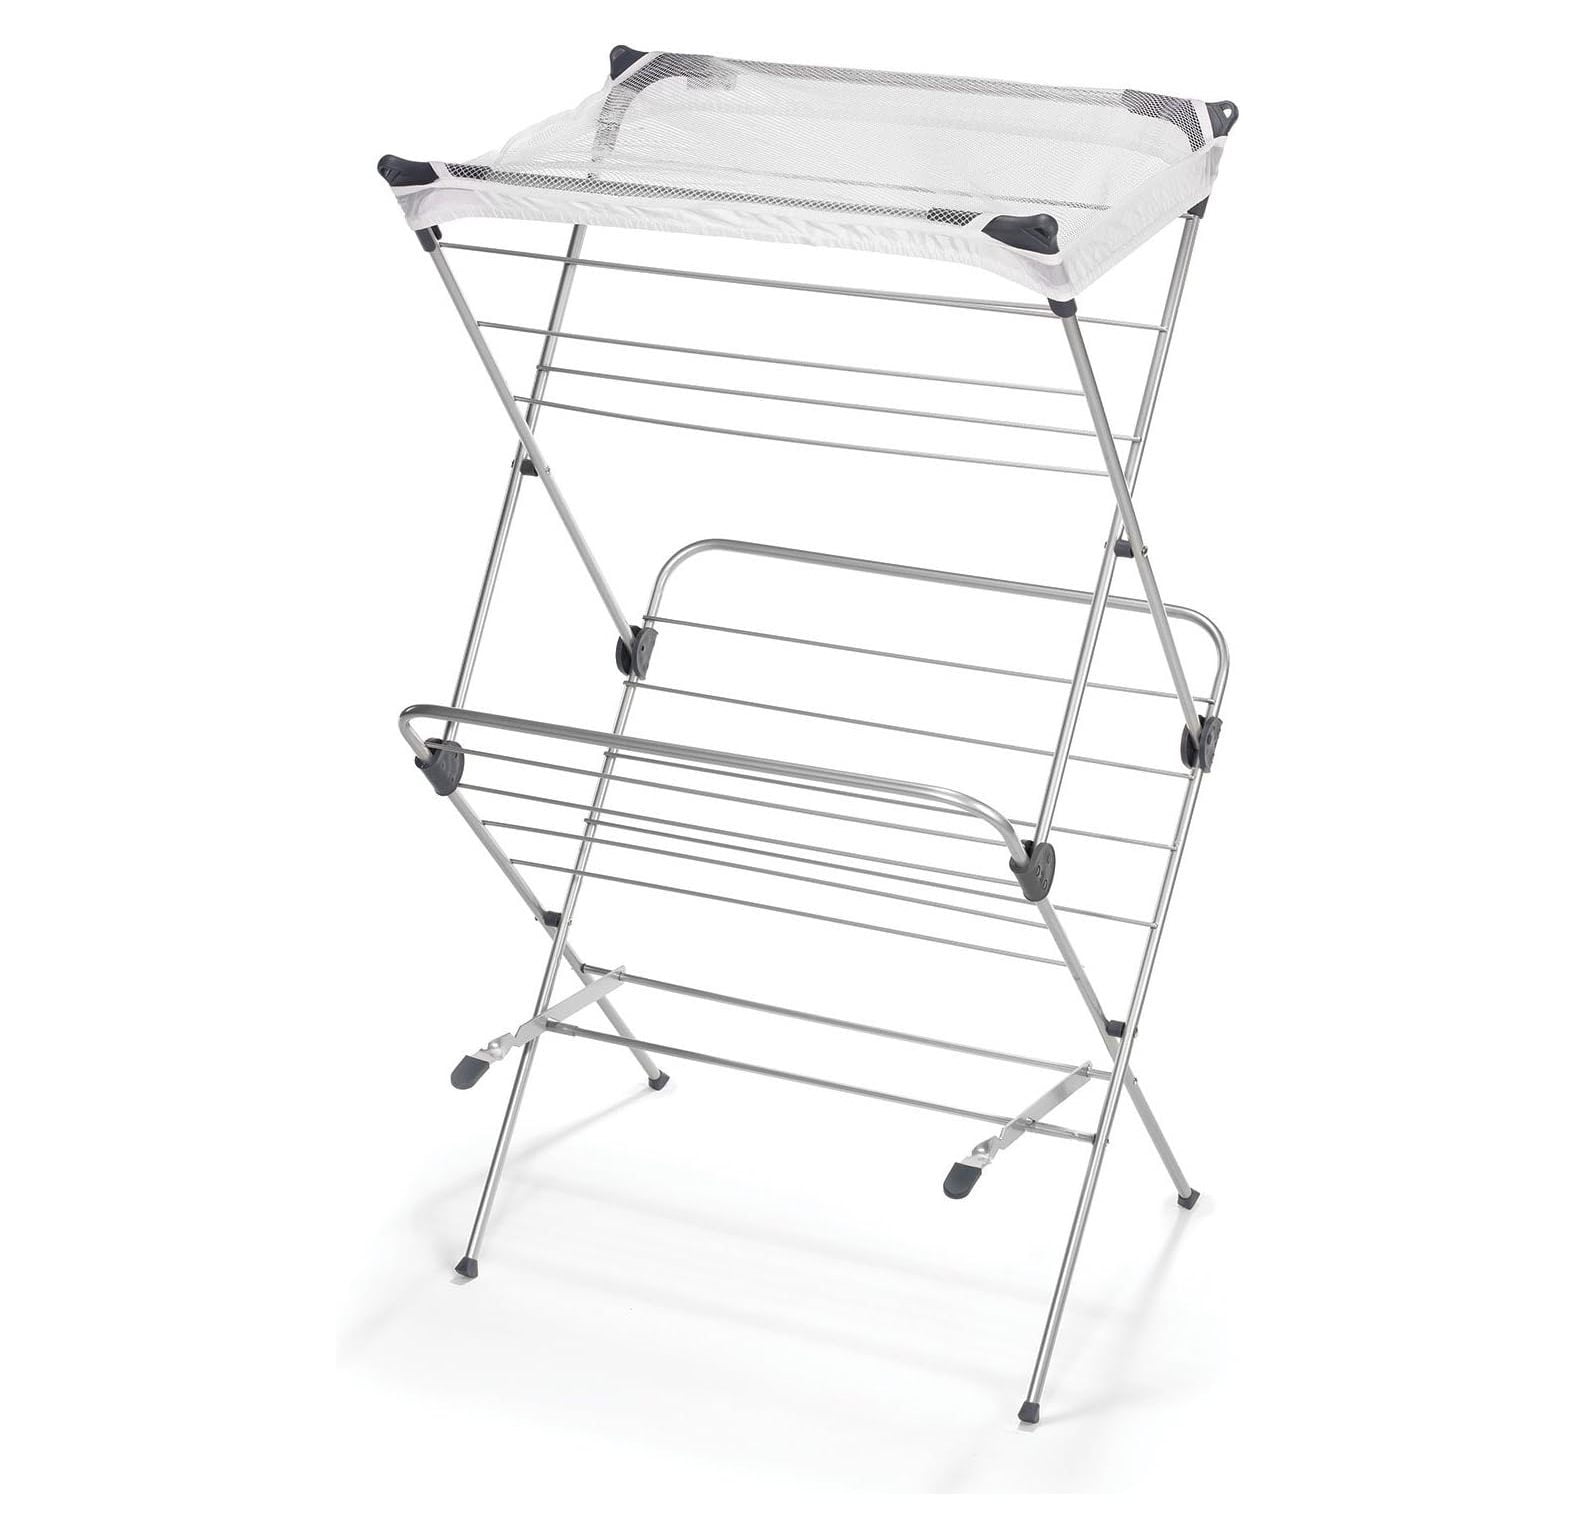 Mdesign Steel Collapsible Over The Door Laundry Drying Rack